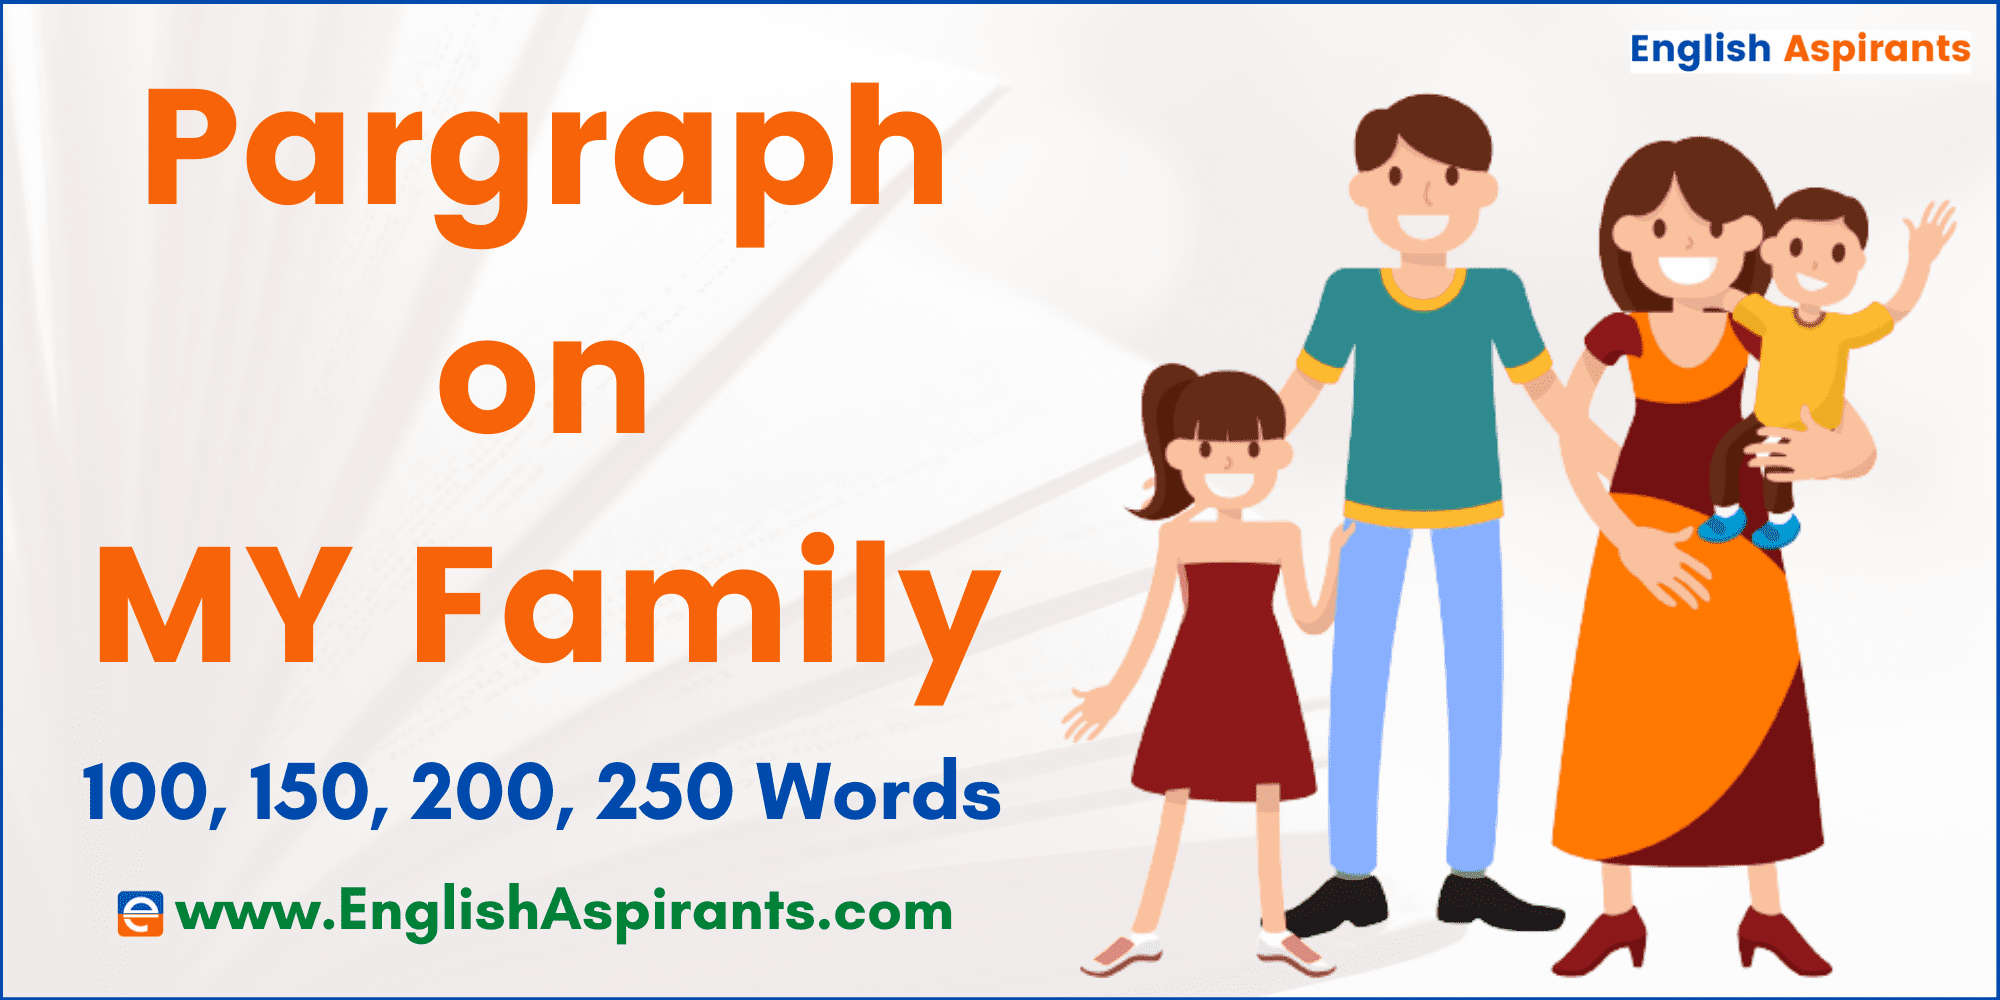 write a paragraph about your family